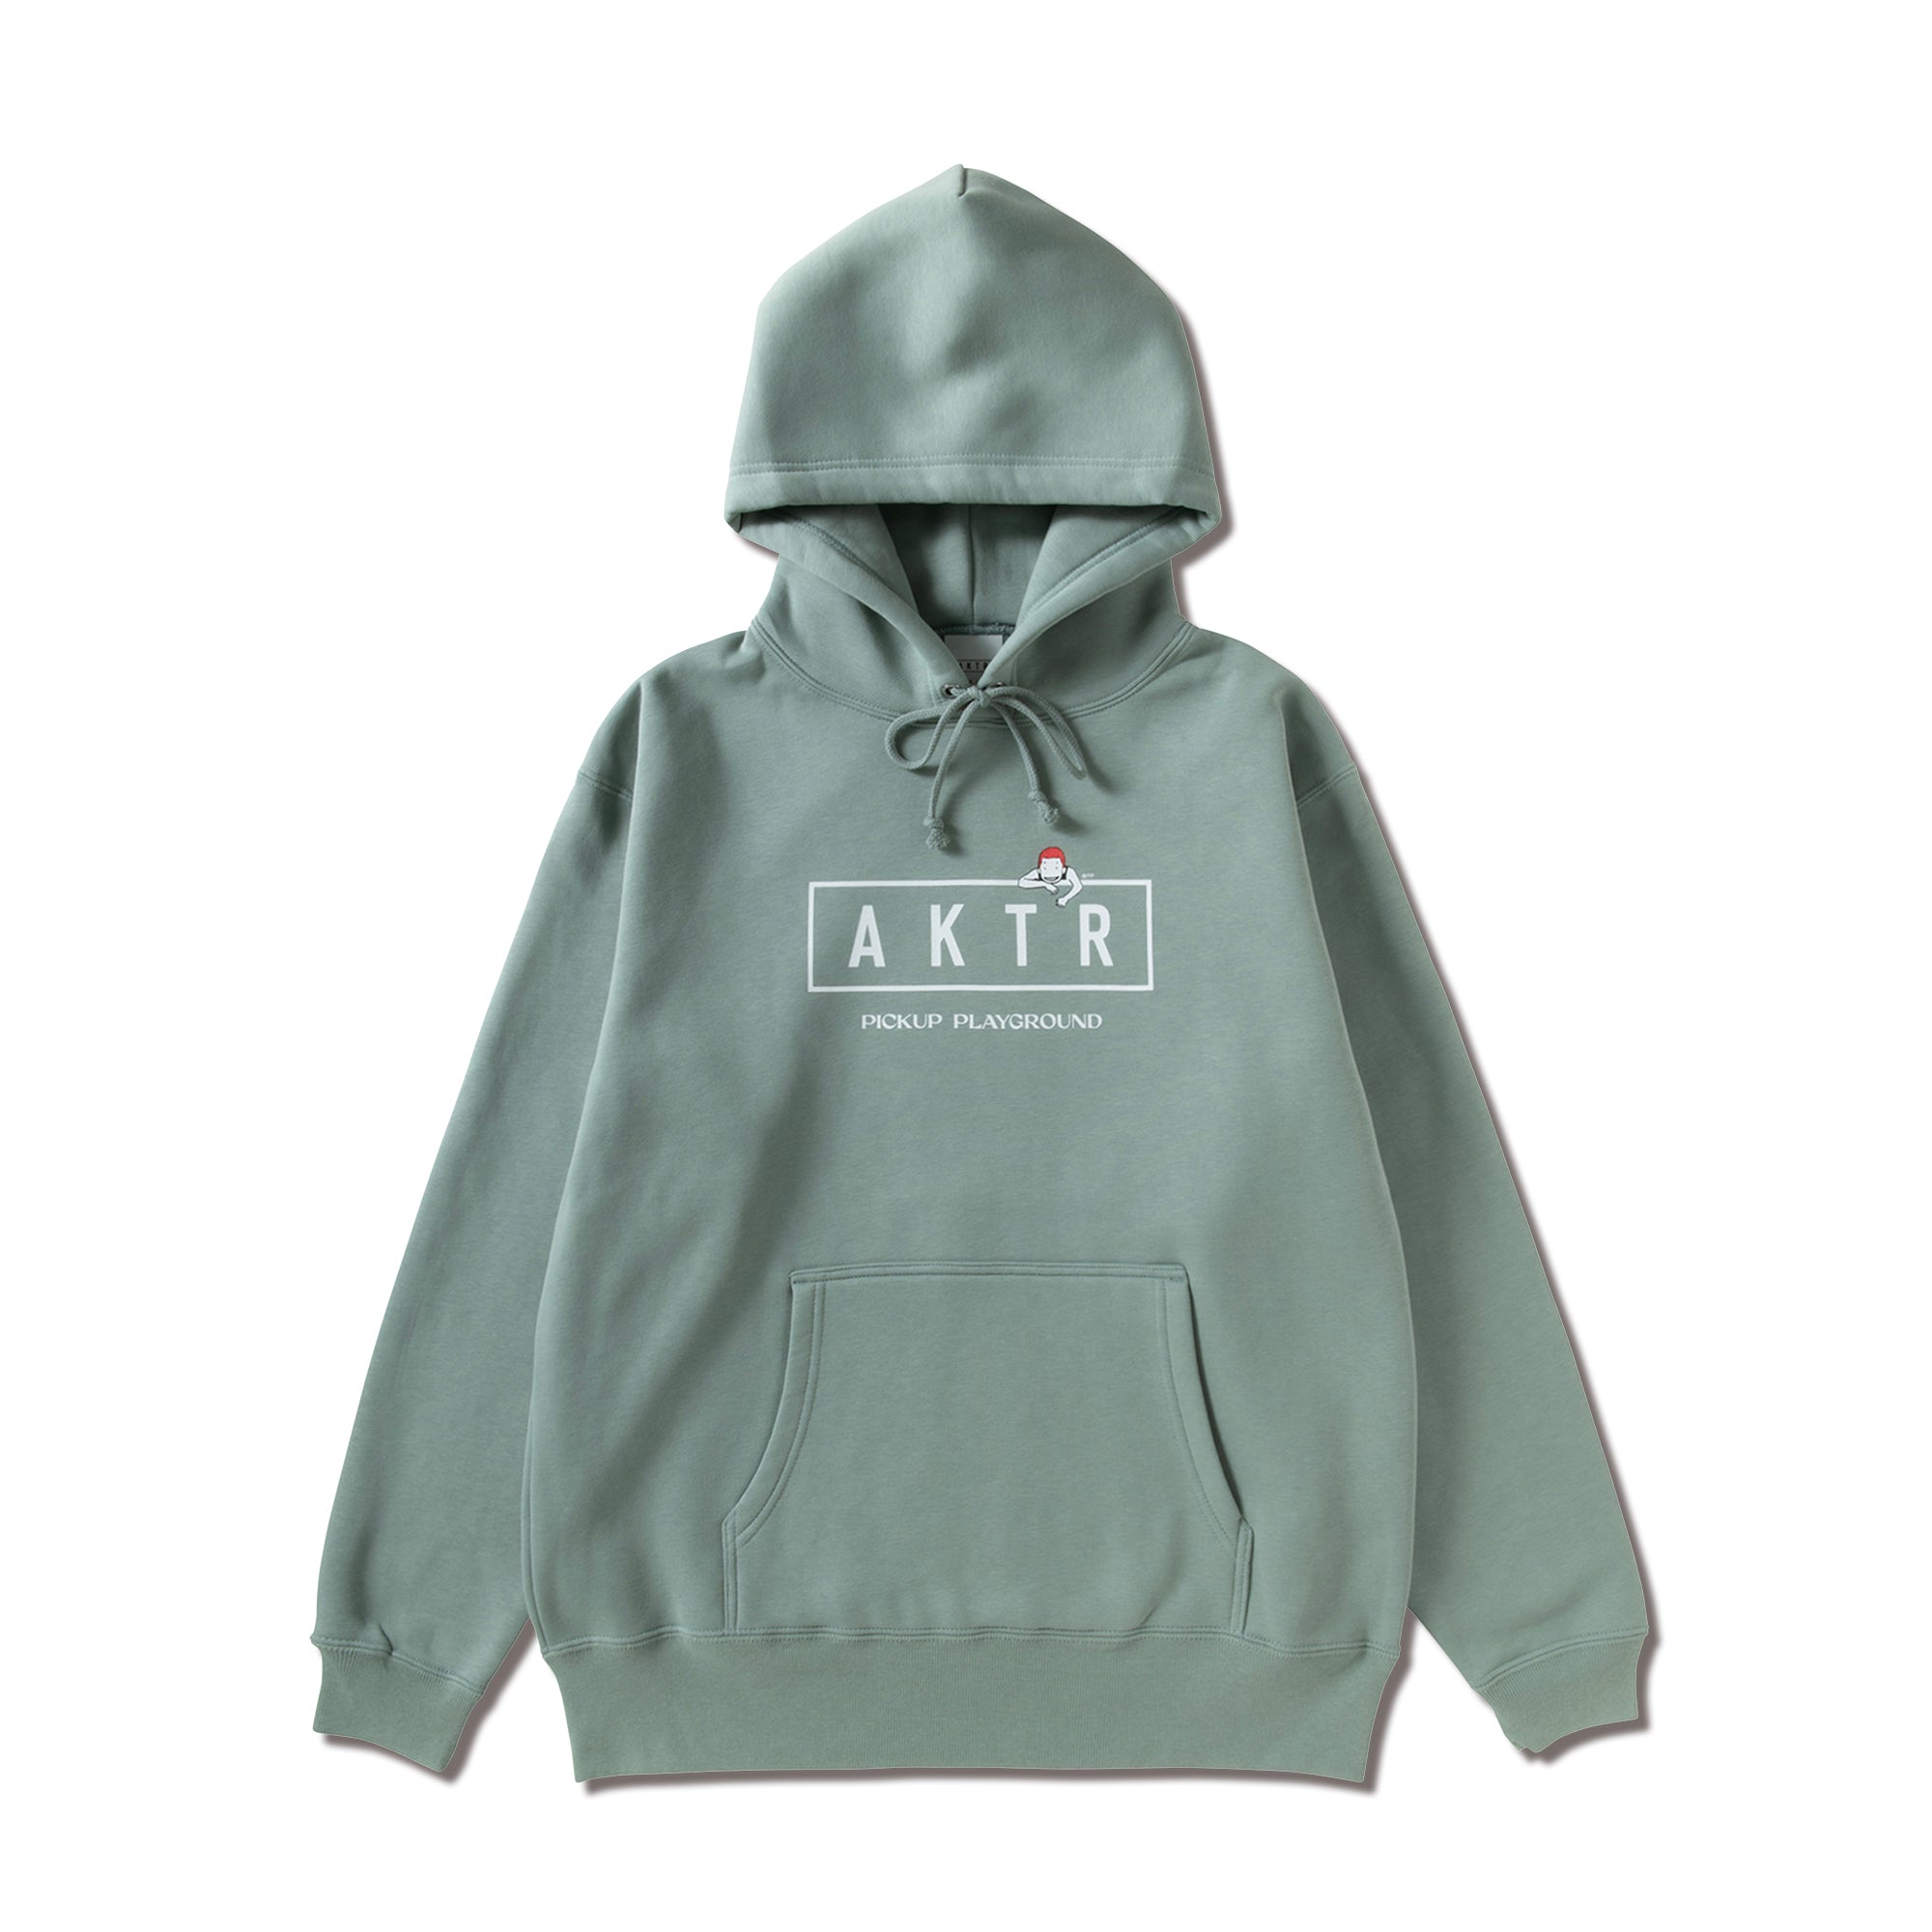 mateAKTR PUP PULLOVER HOODIE GR L